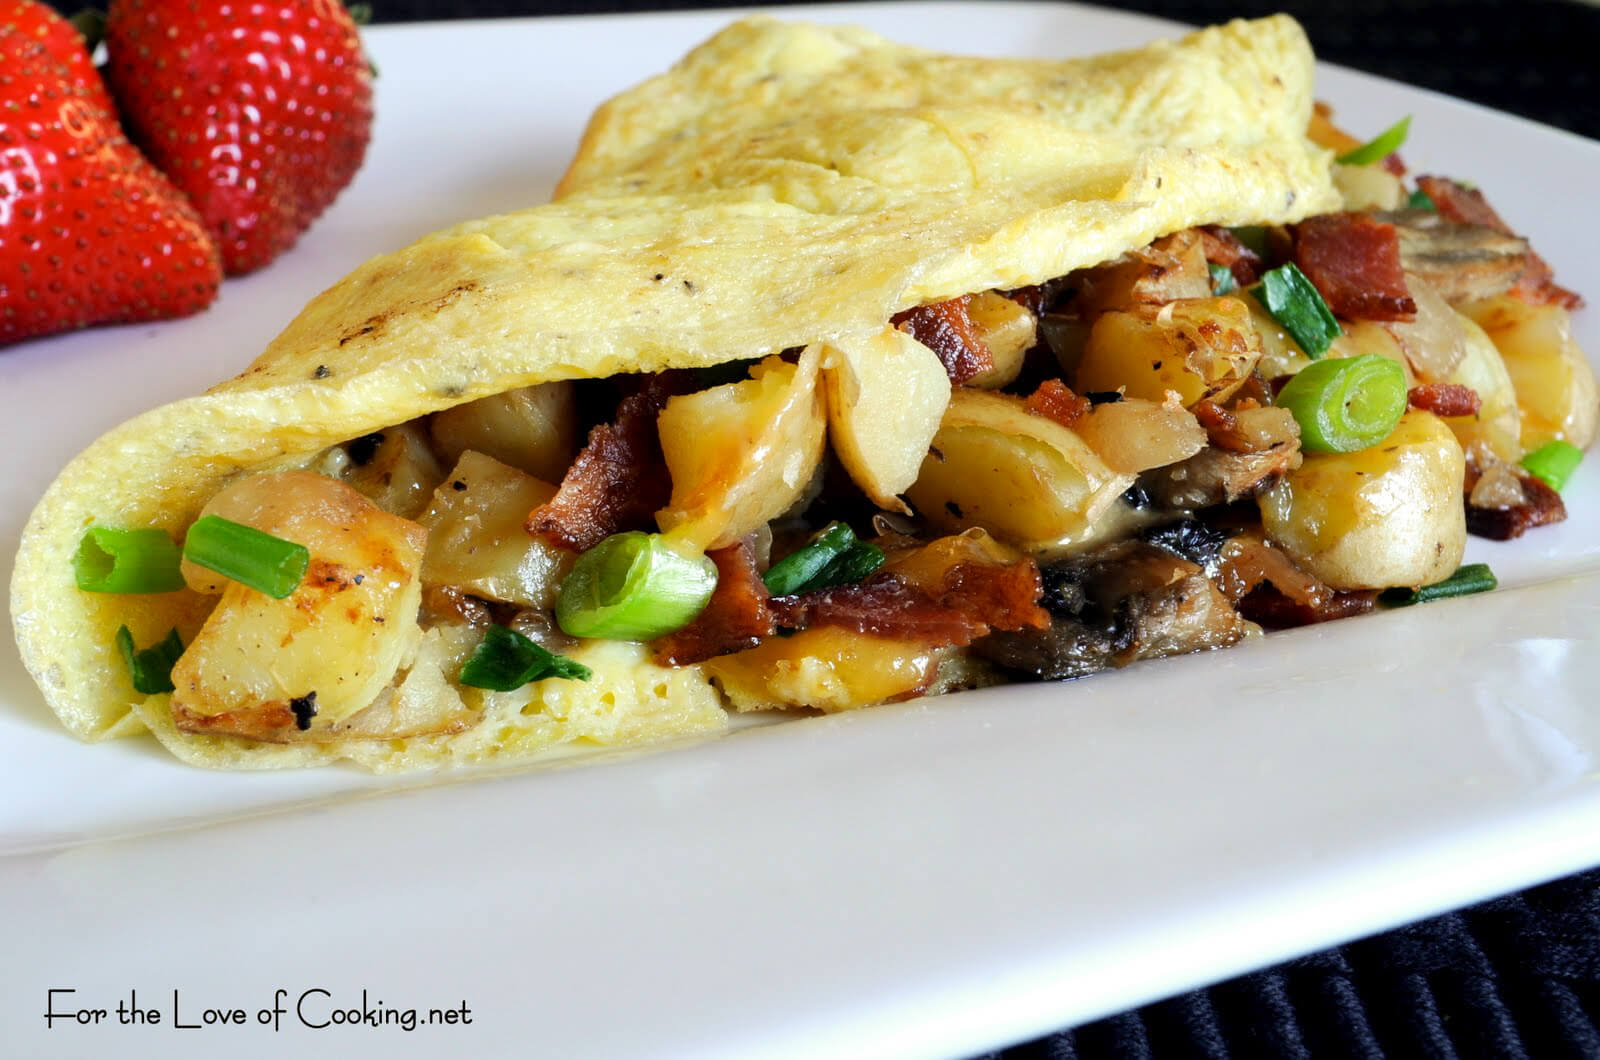 Peasant Omelet with Potatoes, Mushrooms, Bacon, and Cheddar